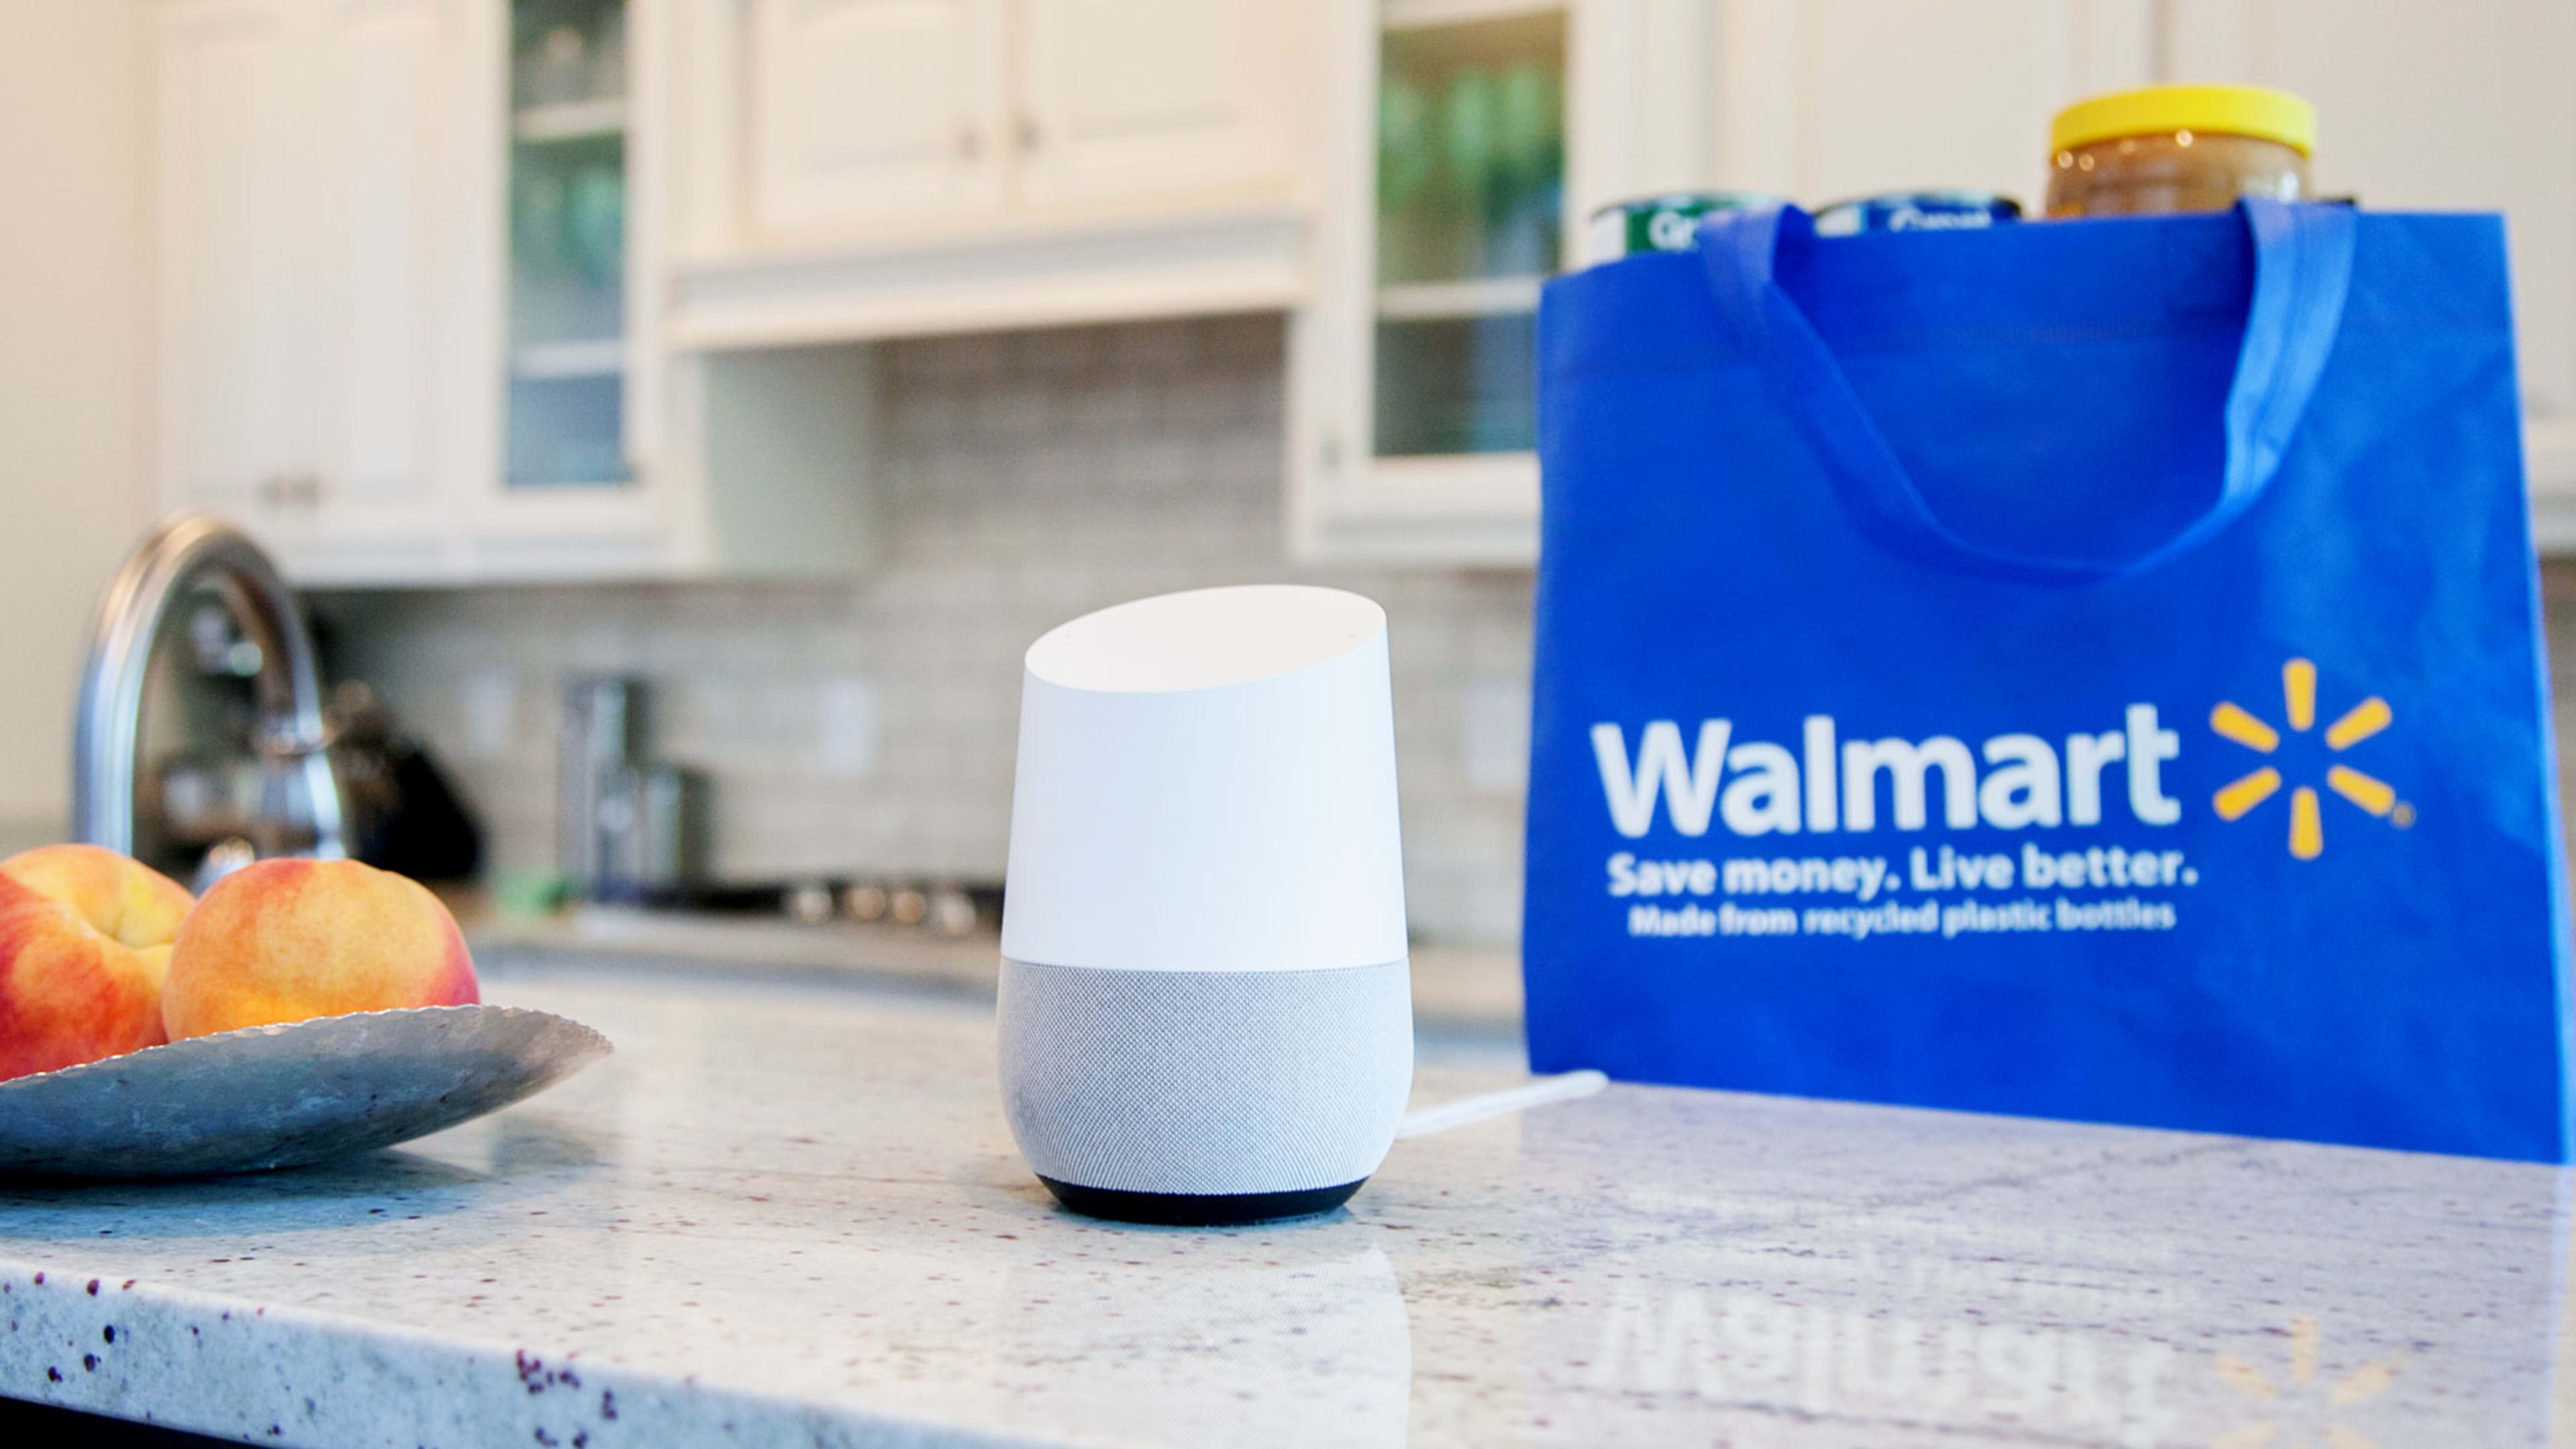 Google Home can’t shop on Amazon, so it’s working with Walmart instead